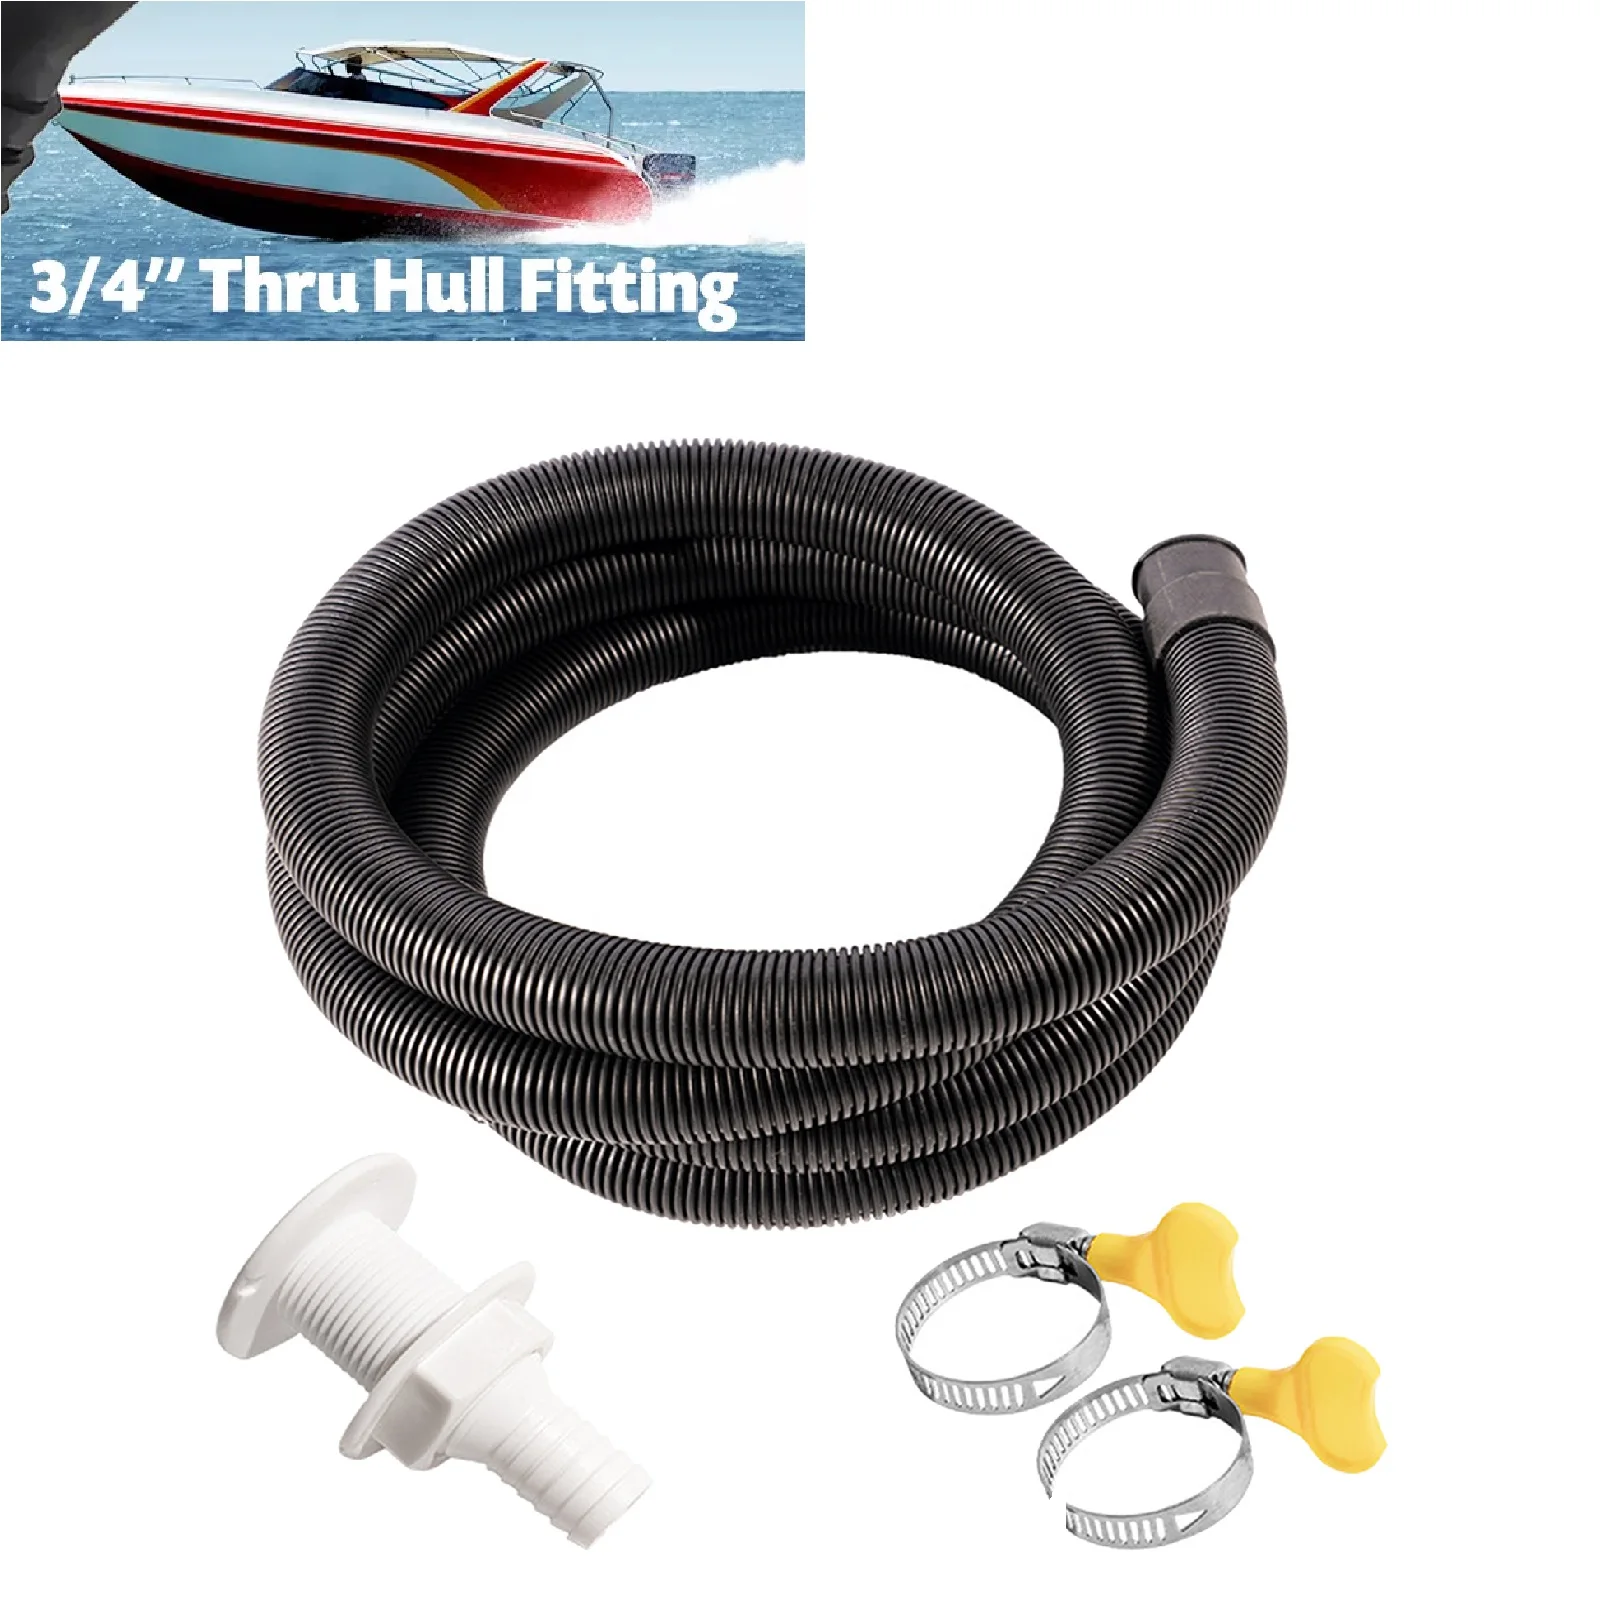 Flexible Bilge Pump Hose Installation Kit 3/4-Inch Diameter 6.6 FT for Boats with 2 Clamps and Thru-Hull Fitting new fuel hose for strimmer brushcutter 1m 39 37 inch chainsaws flexible part petrol pipe replacement for petrol strimmers